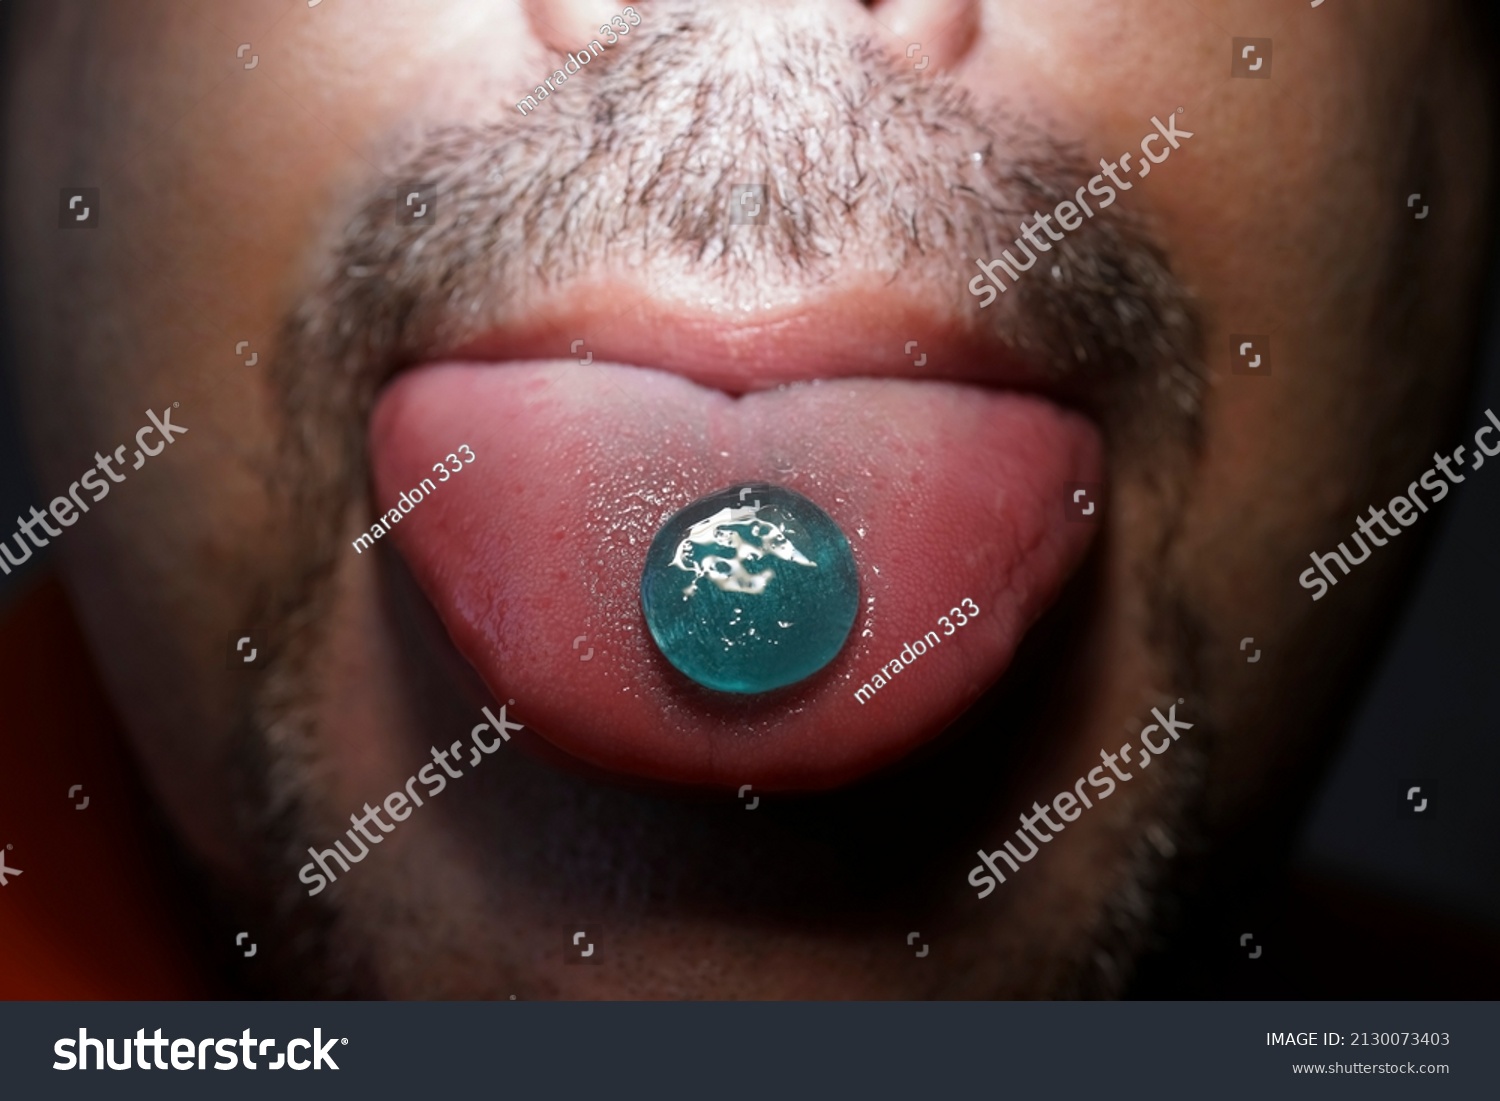 Stock Photo Lollipop From The Throat Which Is On The Tongue Of A Bearded Man Man Eating Pills Cough Sore 2130073403 